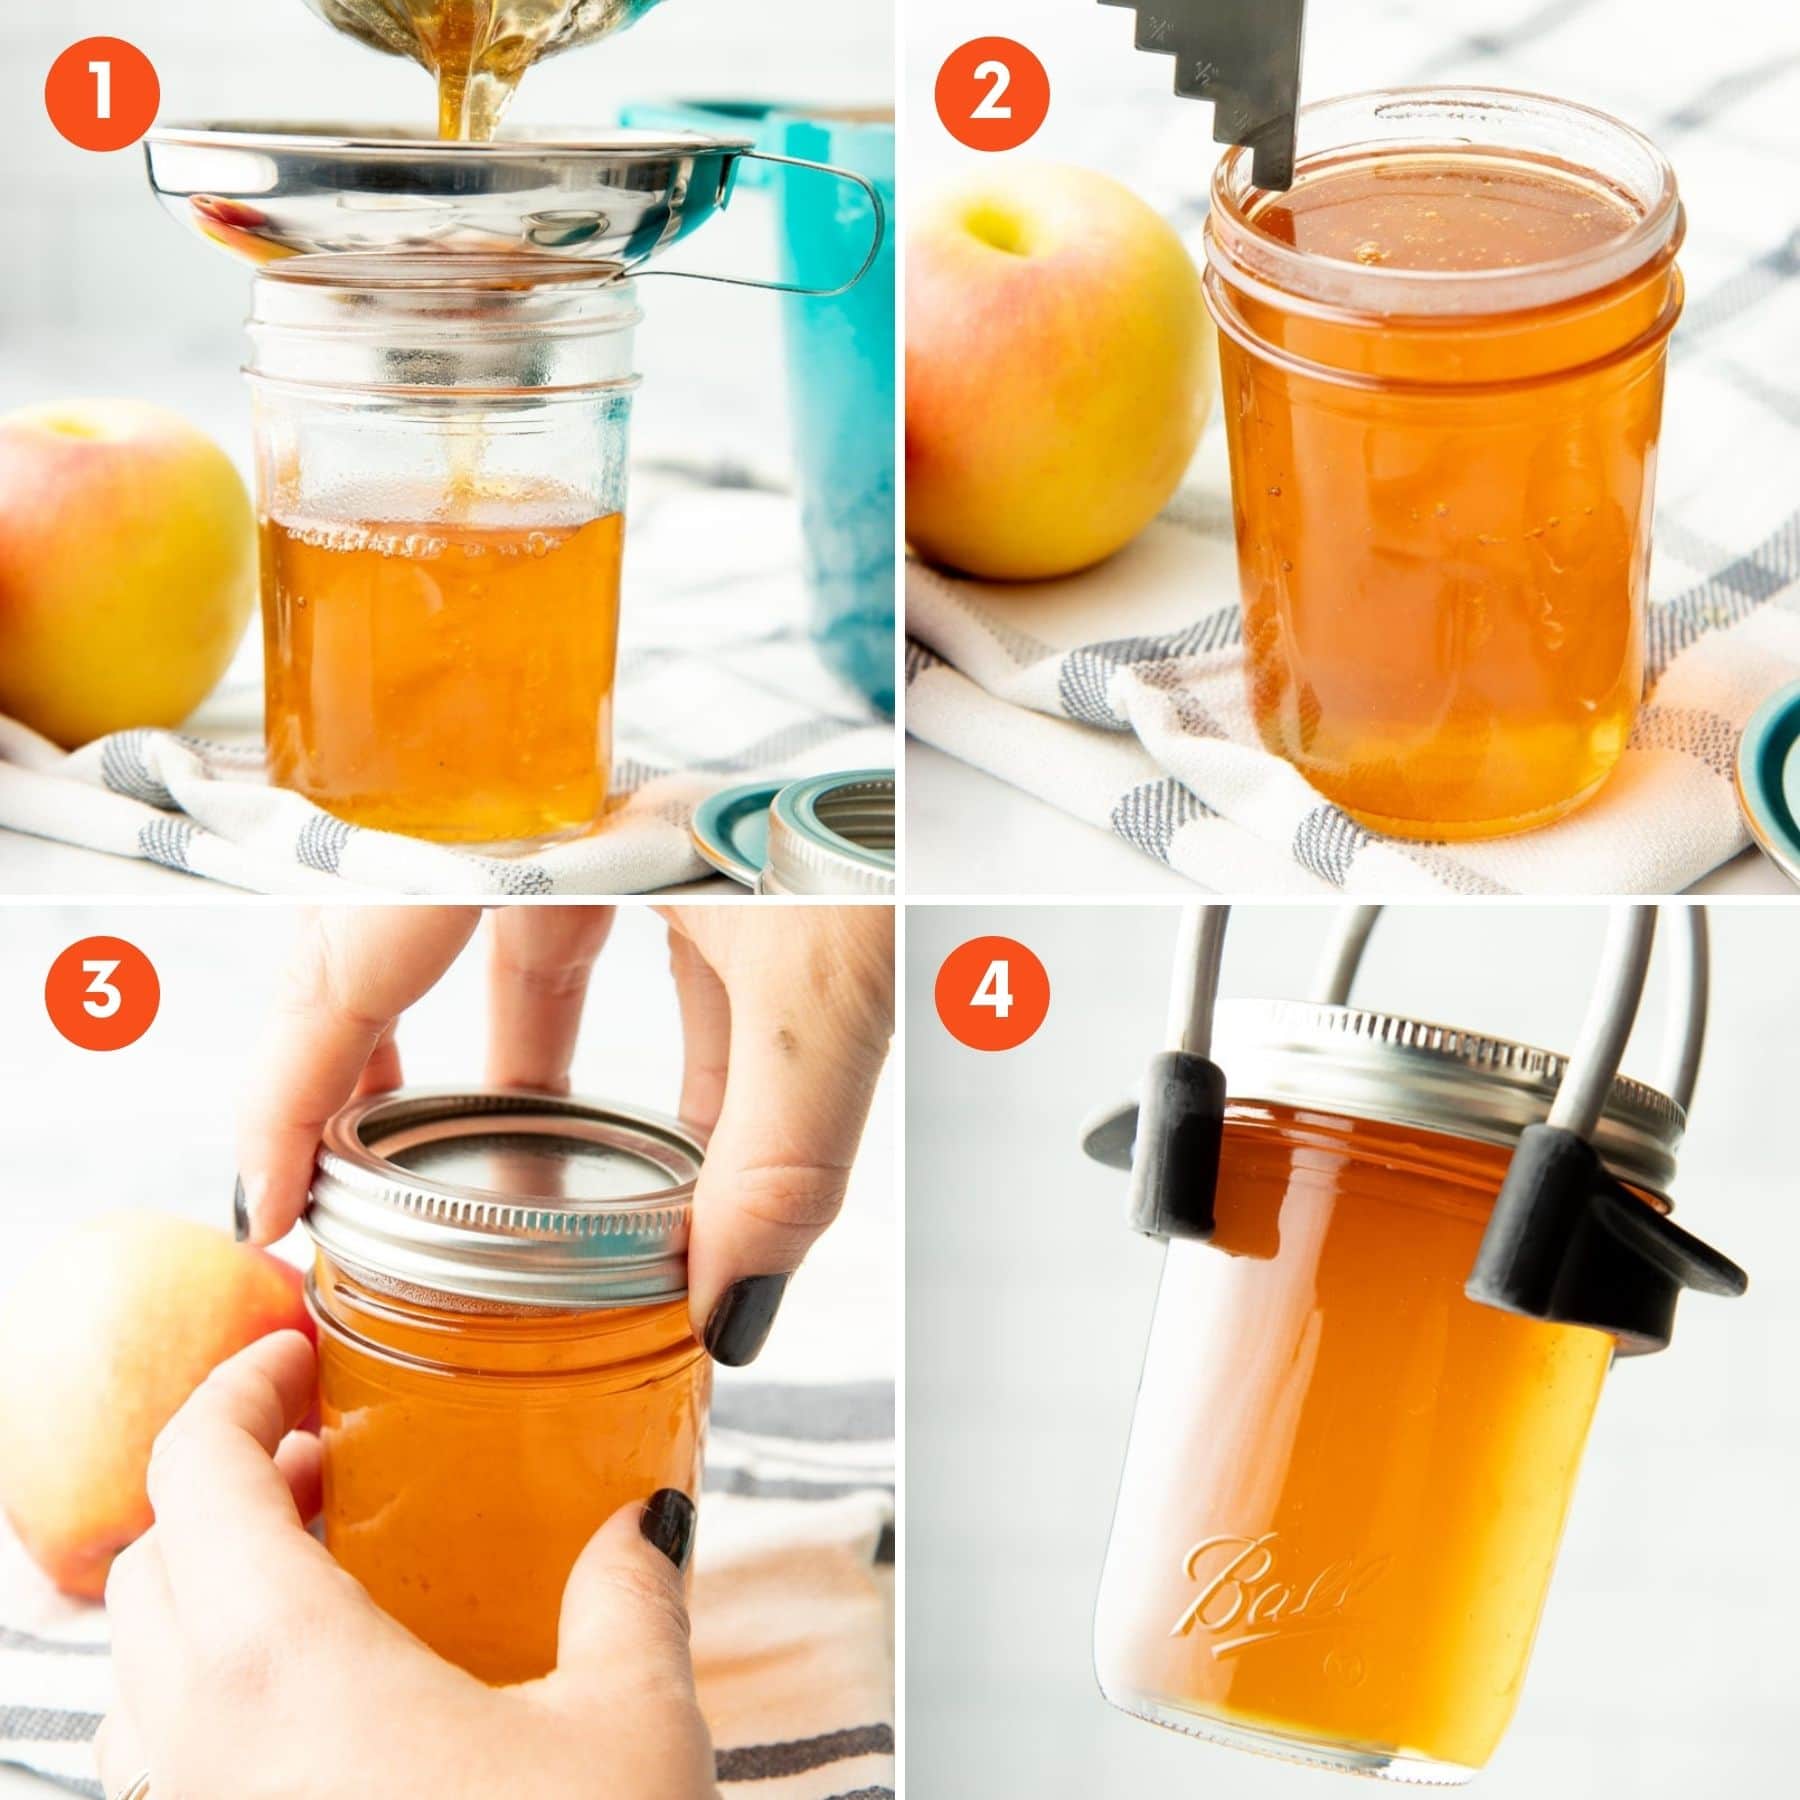 A collage showing four steps to canning.